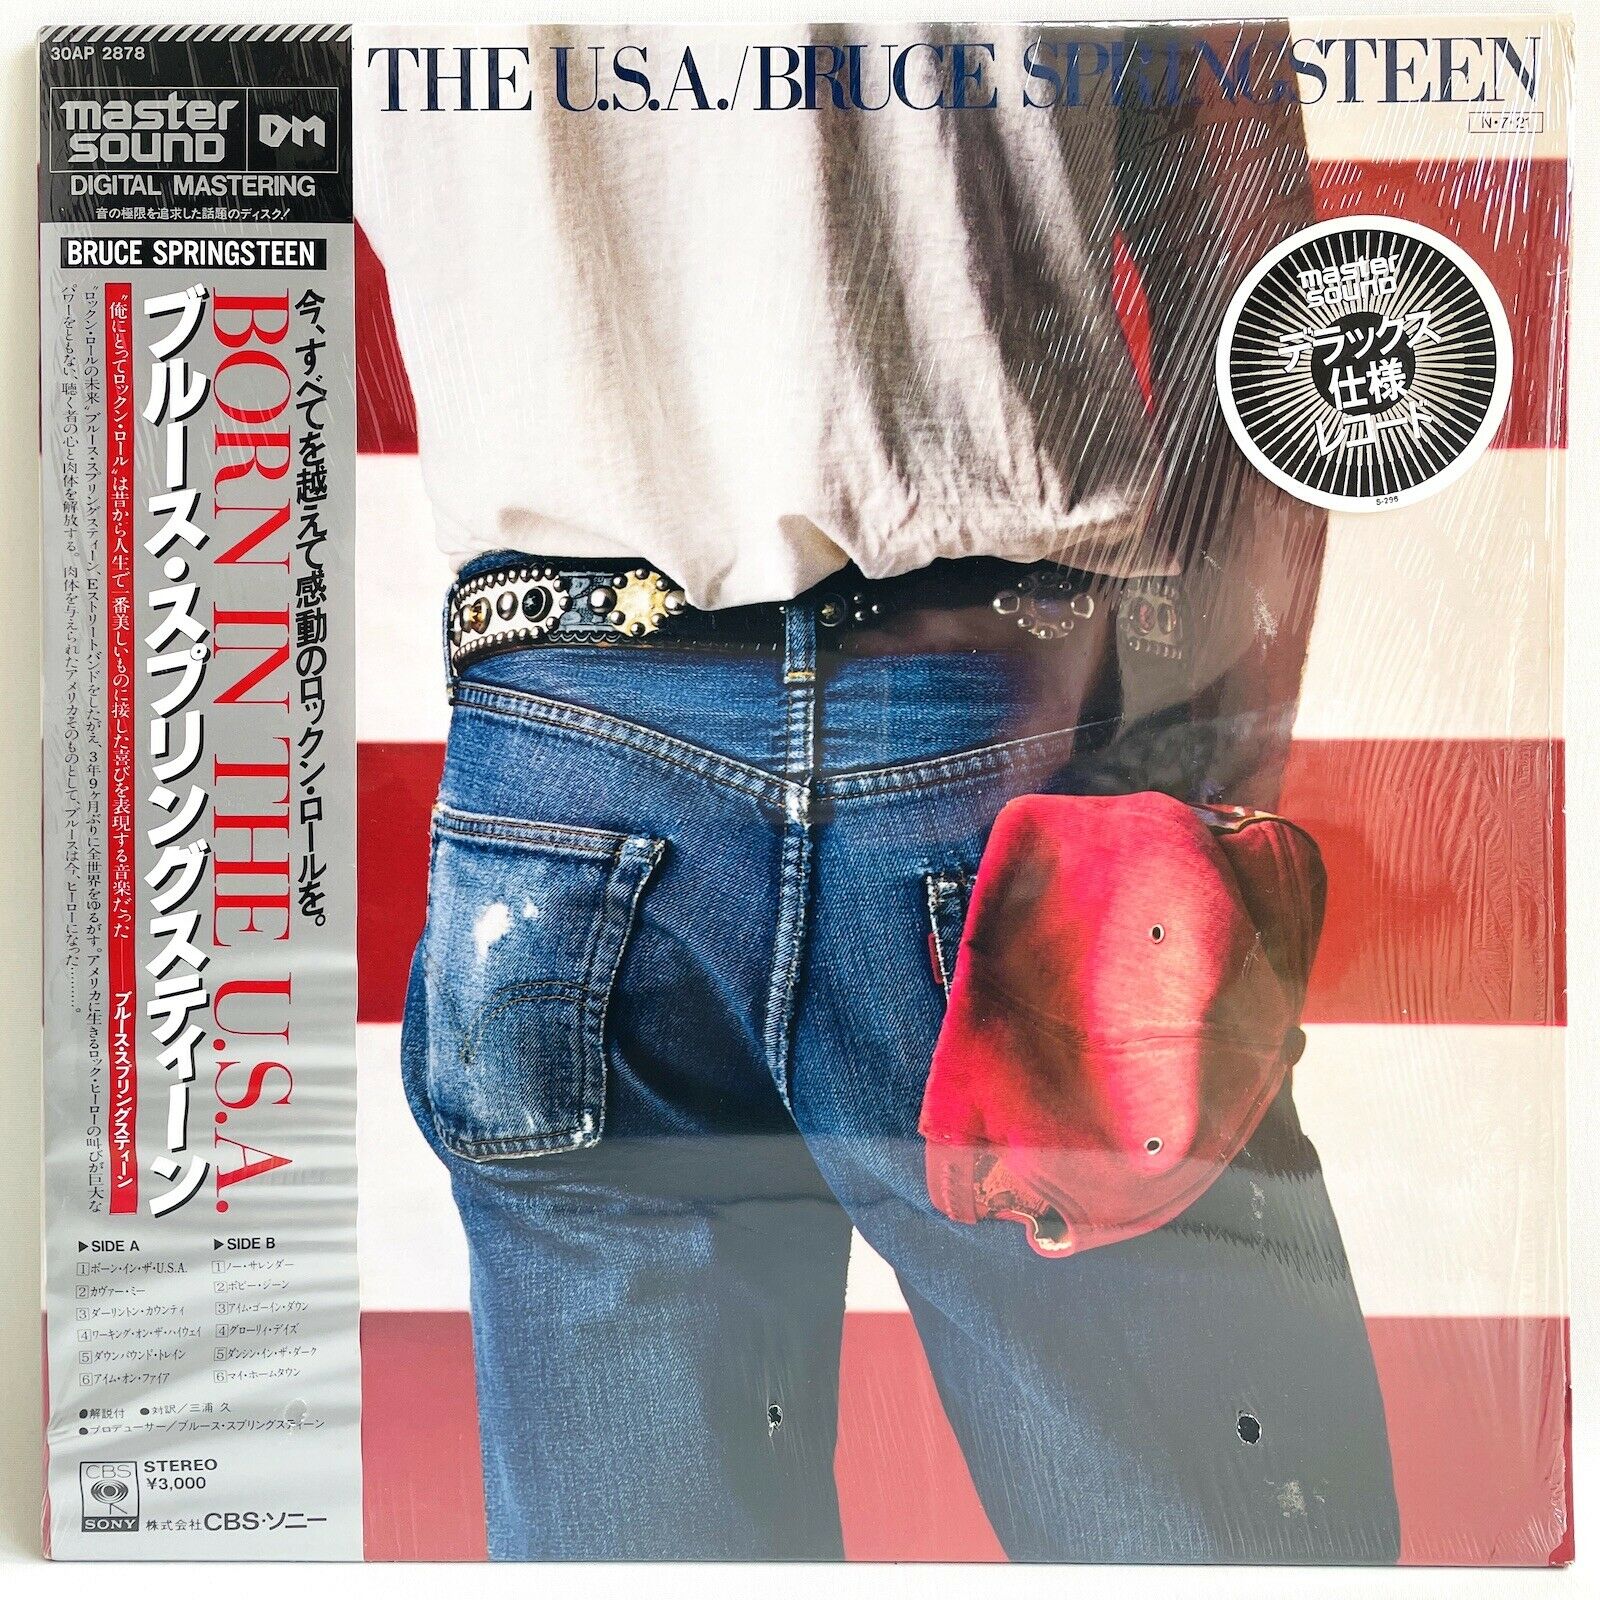 Bruce Springsteen Born In The U.S.A. CBS/Sony 30AP 2878 Mastersound